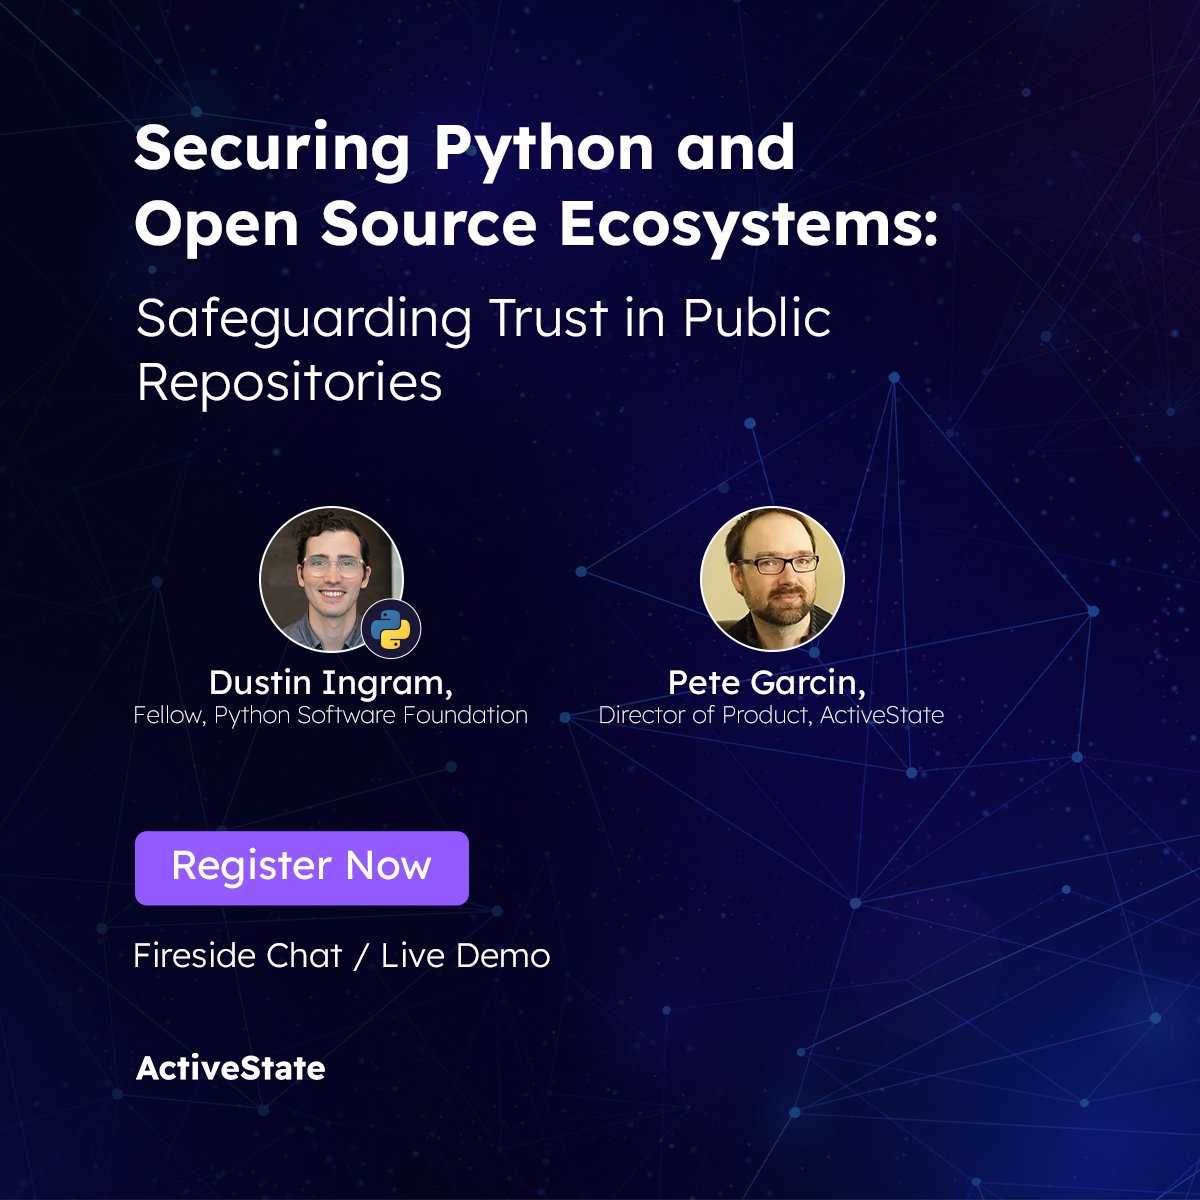 Join Dustin Ingram, a Fellow @ThePSF, and Activator Pete Garcin to our upcoming webinar on securing PyPI and open-source ecosystems. Get ready for an insightful discussion and invaluable insights from these industry experts. Secure your spot now: hubs.ly/Q02svkR70 #Python